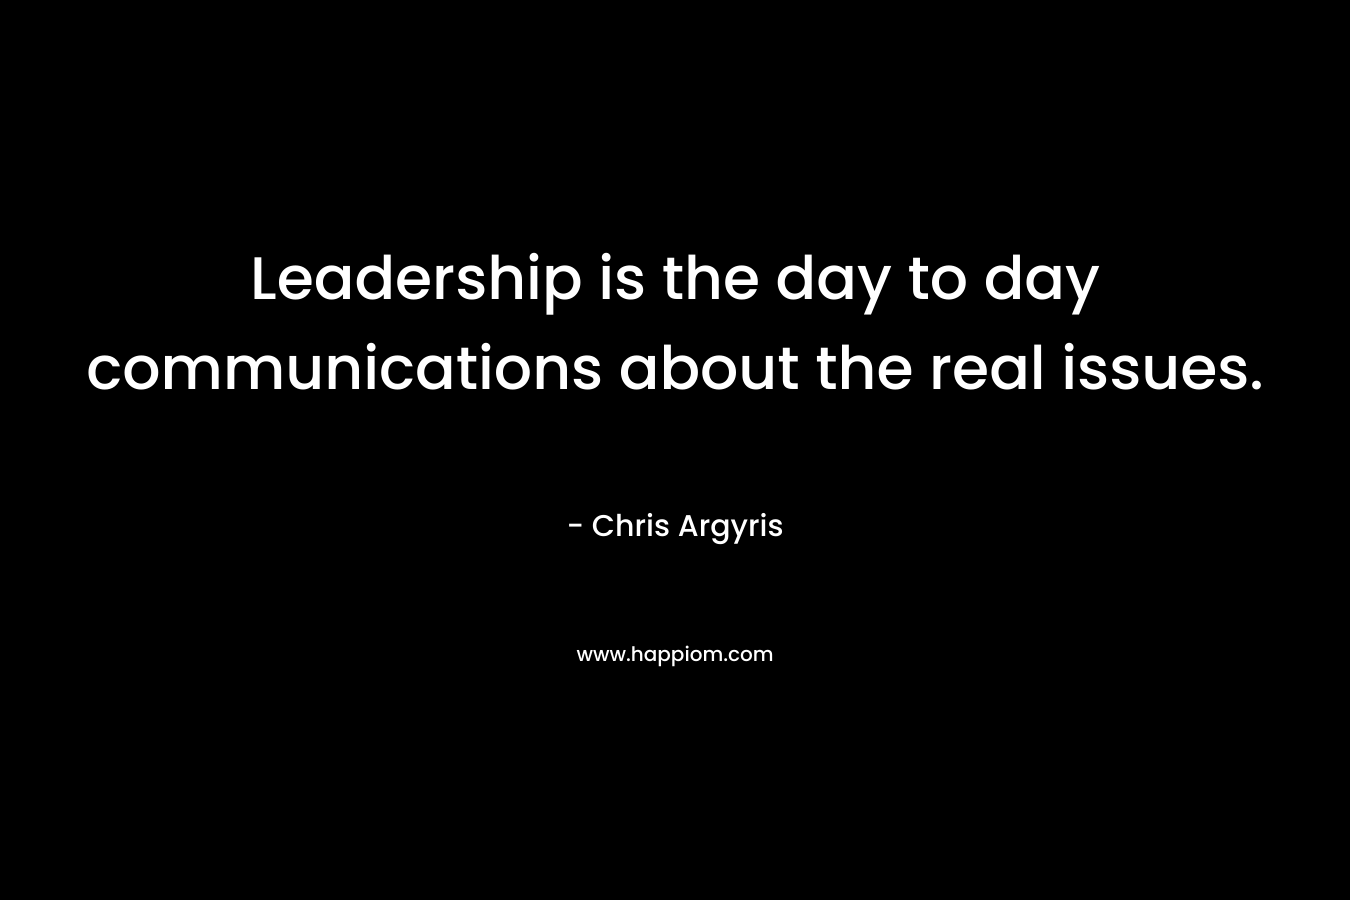 Leadership is the day to day communications about the real issues. – Chris Argyris